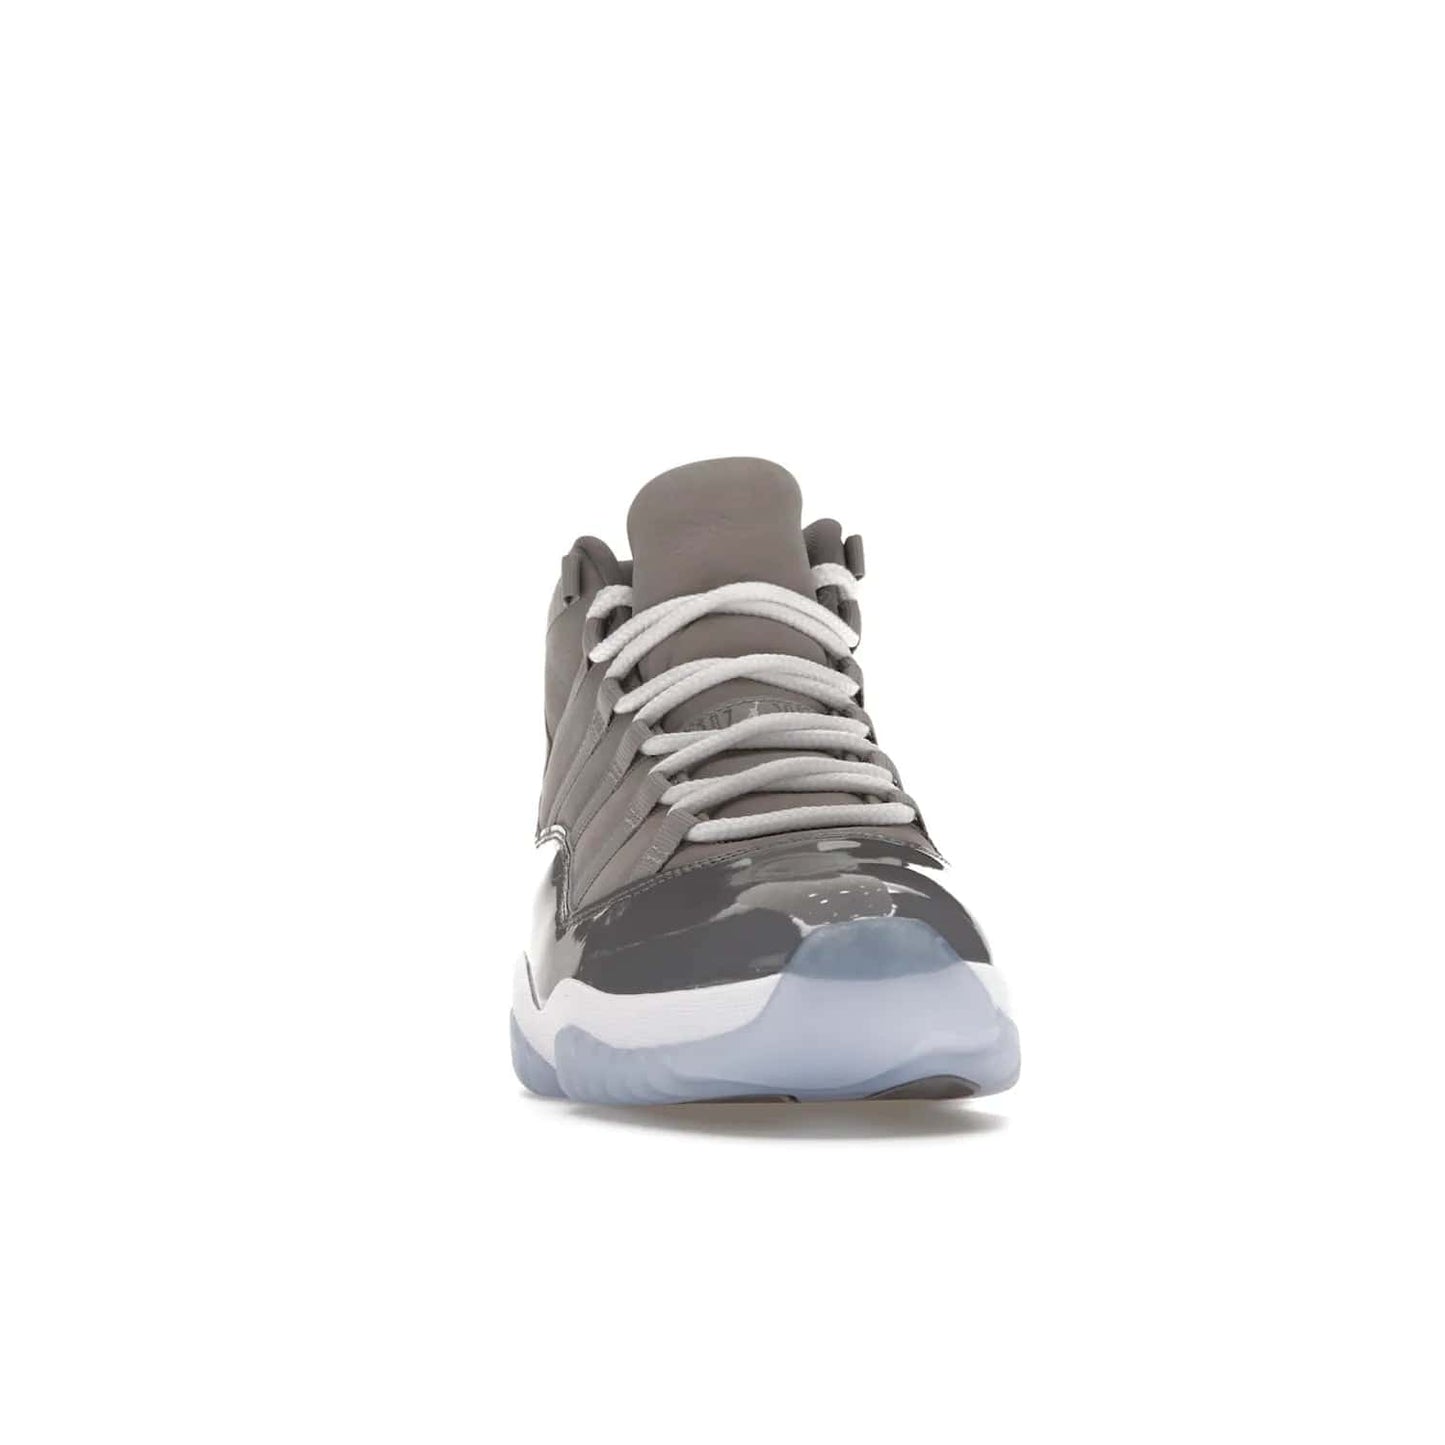 Jordan 11 Retro Cool Grey (2021) - Image 9 - Only at www.BallersClubKickz.com - Shop the Air Jordan 11 Retro Cool Grey (2021) for a must-have sneaker with a Cool Grey Durabuck upper, patent leather overlays, signature Jumpman embroidery, a white midsole, icy blue translucent outsole, and Multi-Color accents.  Released in December 2021 for $225.